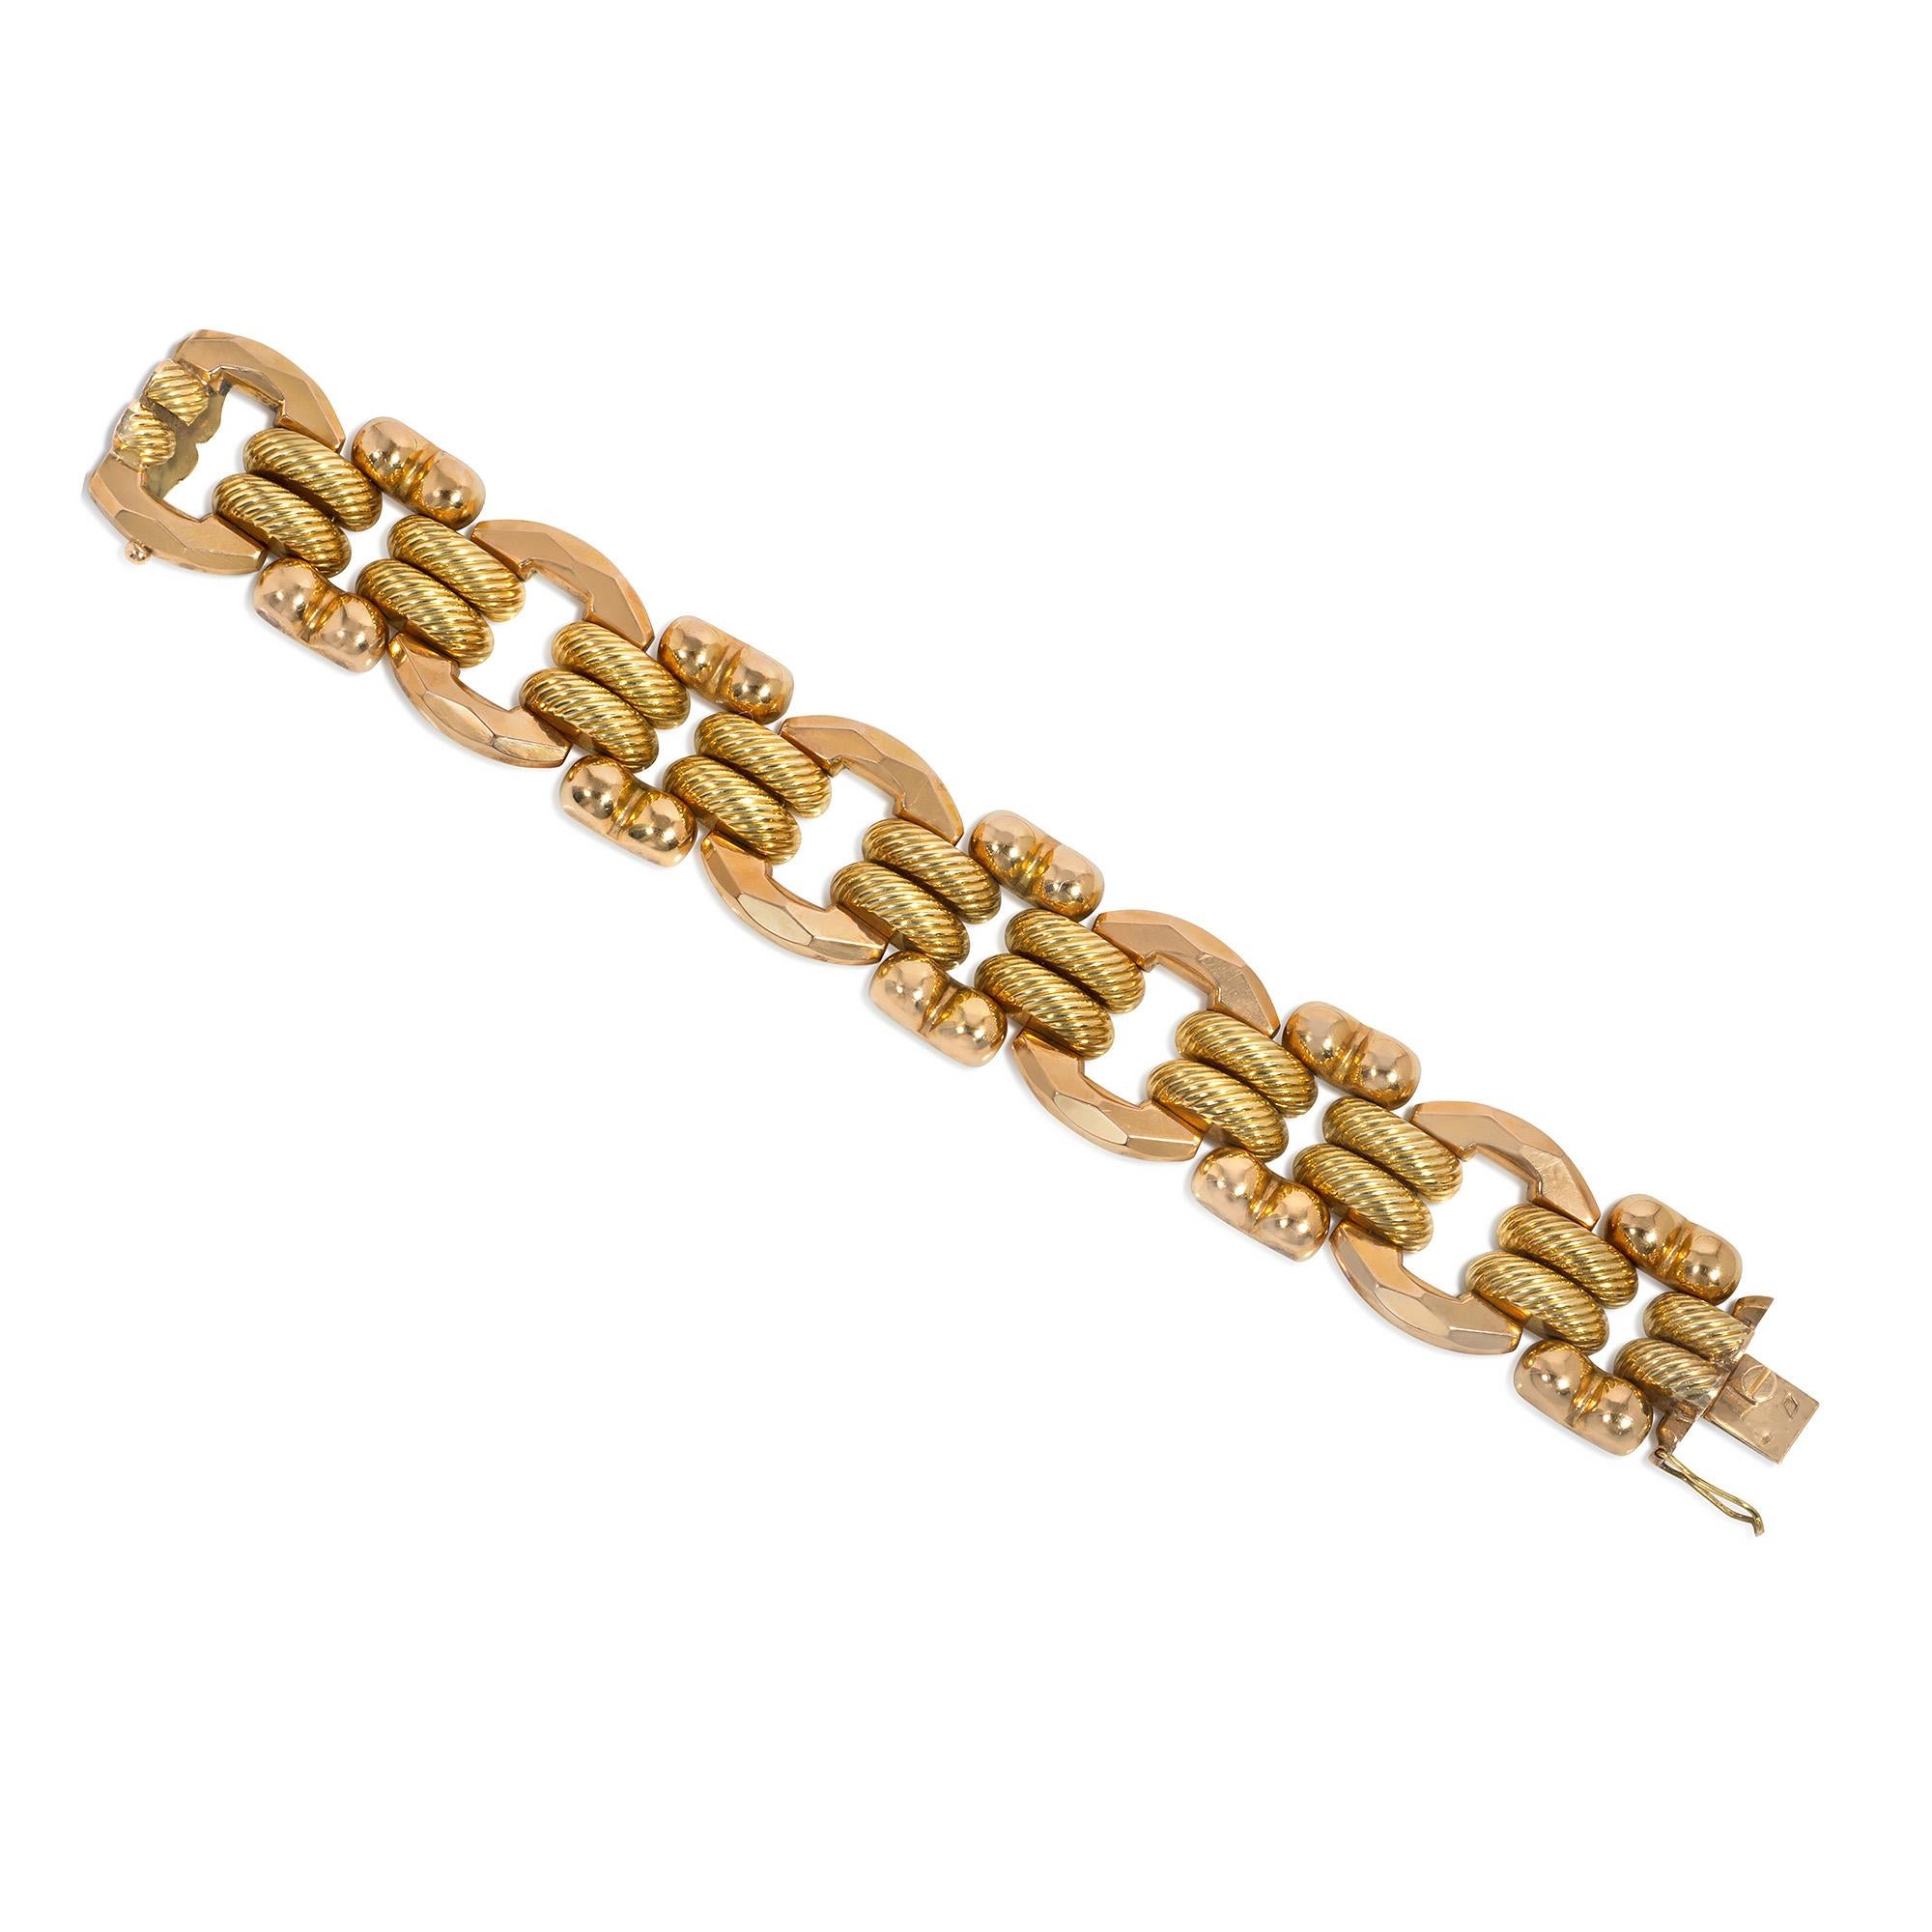 A Retro two-color gold tank bracelet featuring faceted oval rose gold links alternating with lobed rectangular links, attached by textured, half-round yellow gold spacers, in 18k. Italy.

* Includes letter of authenticity for insurance purposes
*